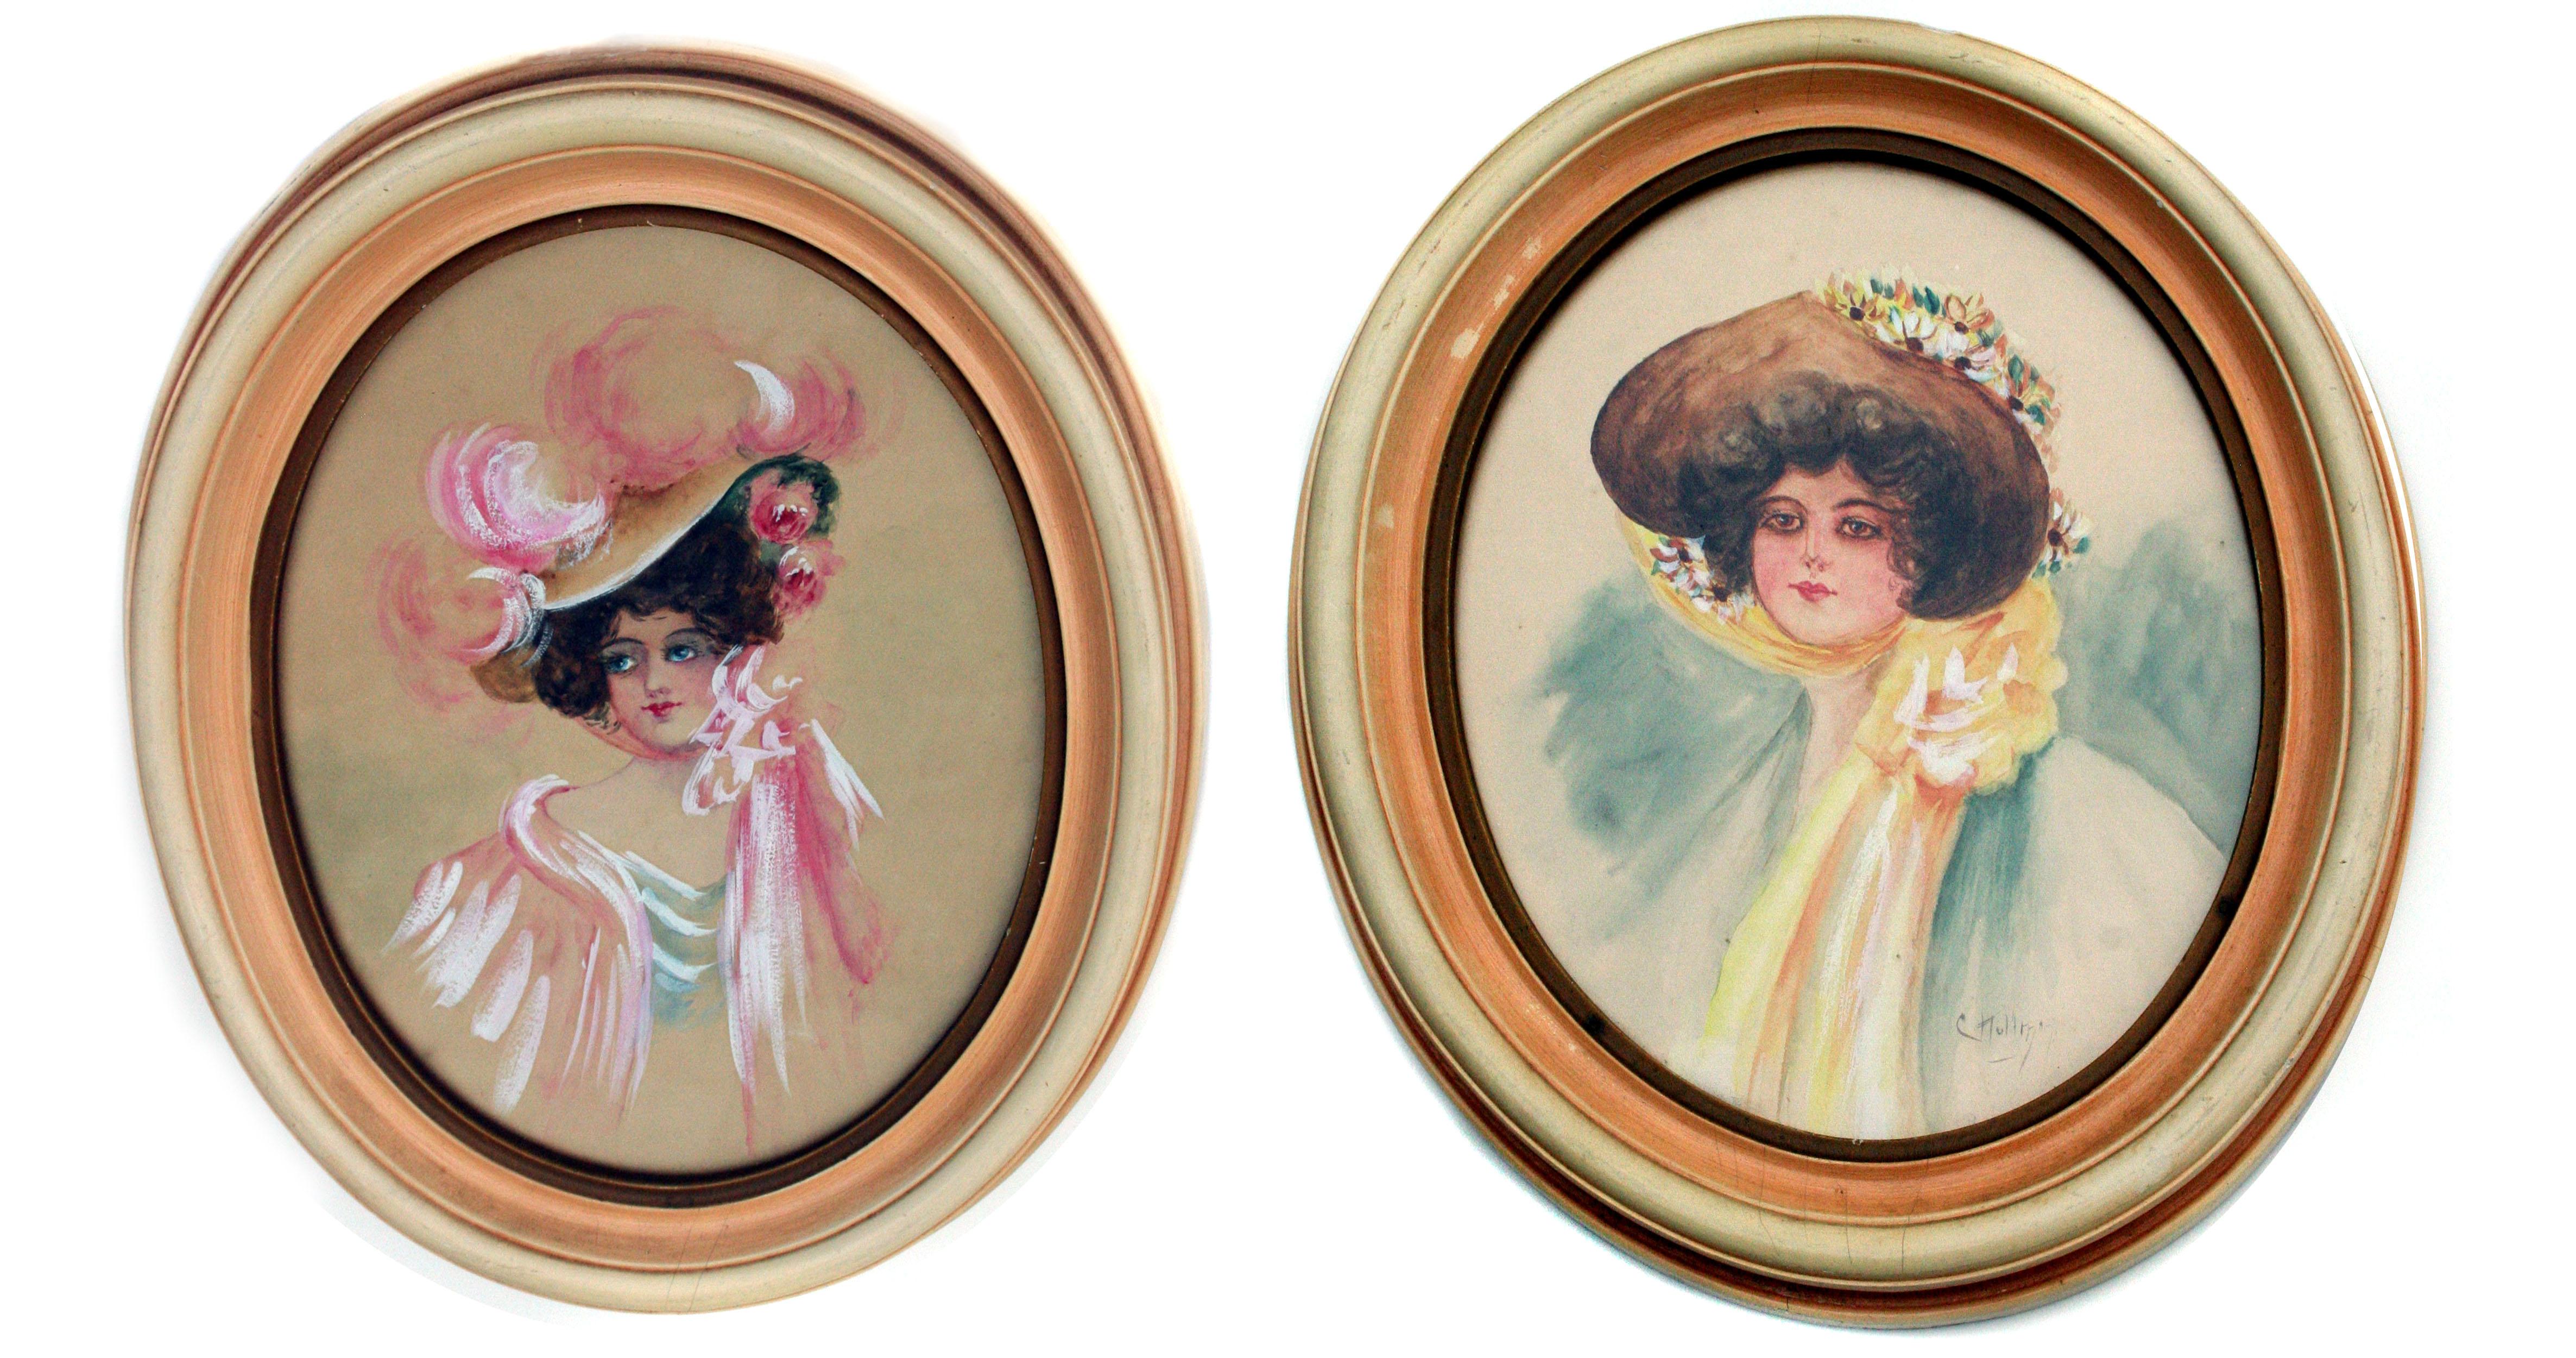 Gibson Girls - Set of Two 1920's Portraits, Vintage Fashion Illustrations - Painting by Charles Hollman